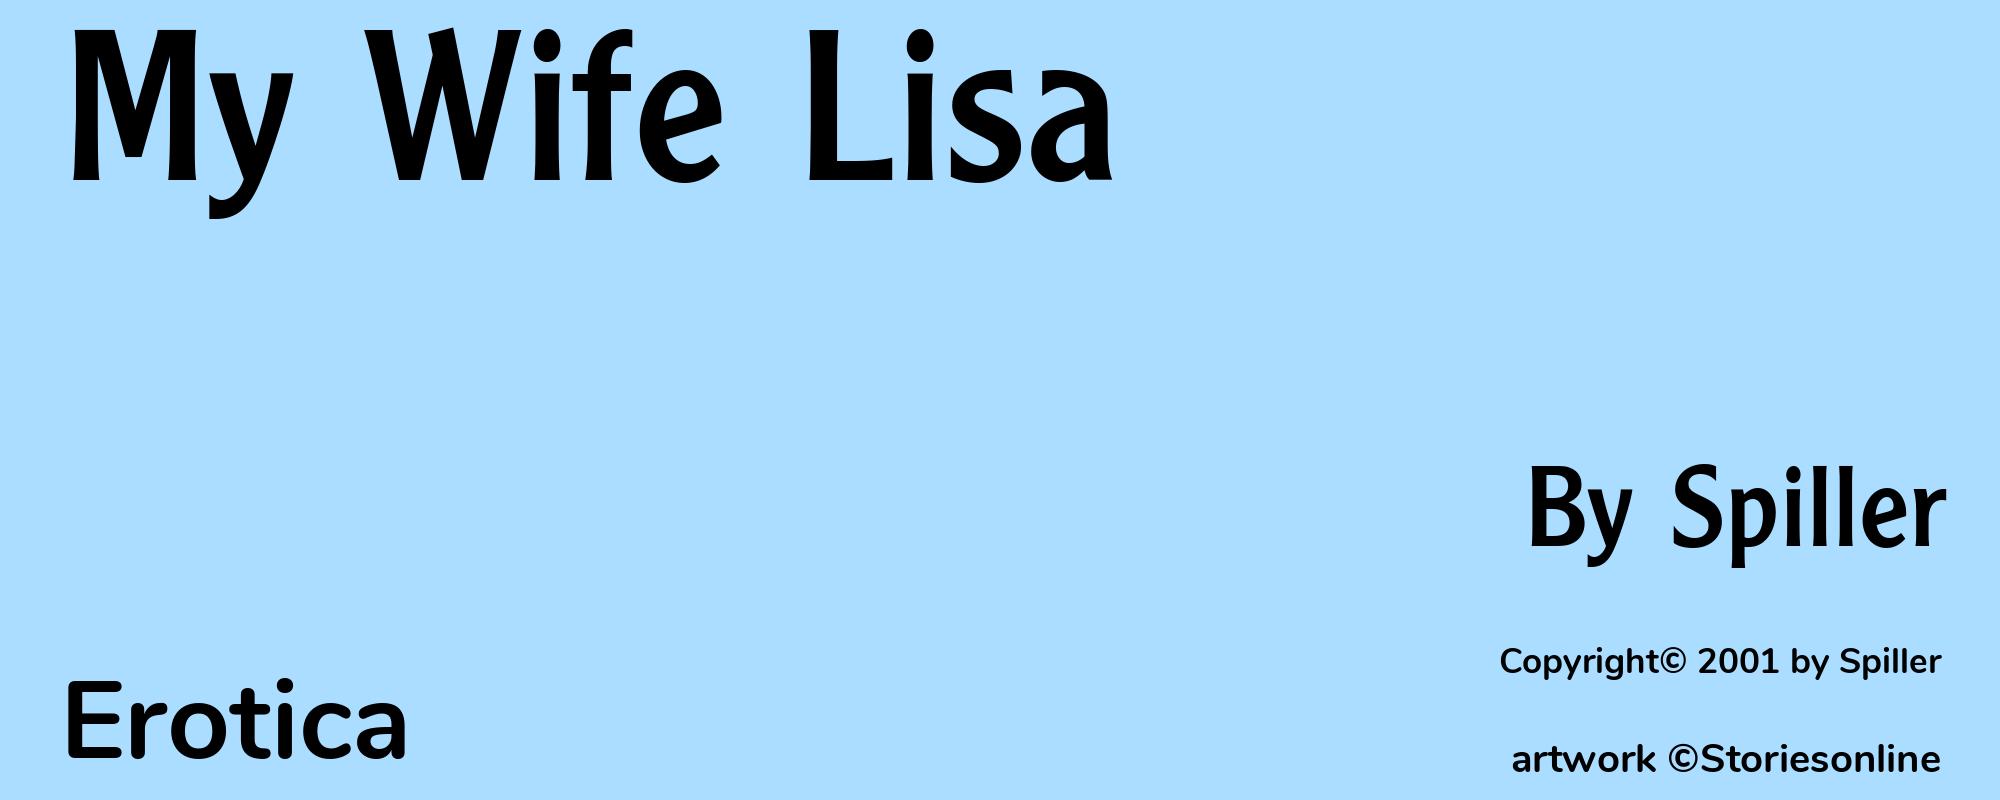 My Wife Lisa - Cover